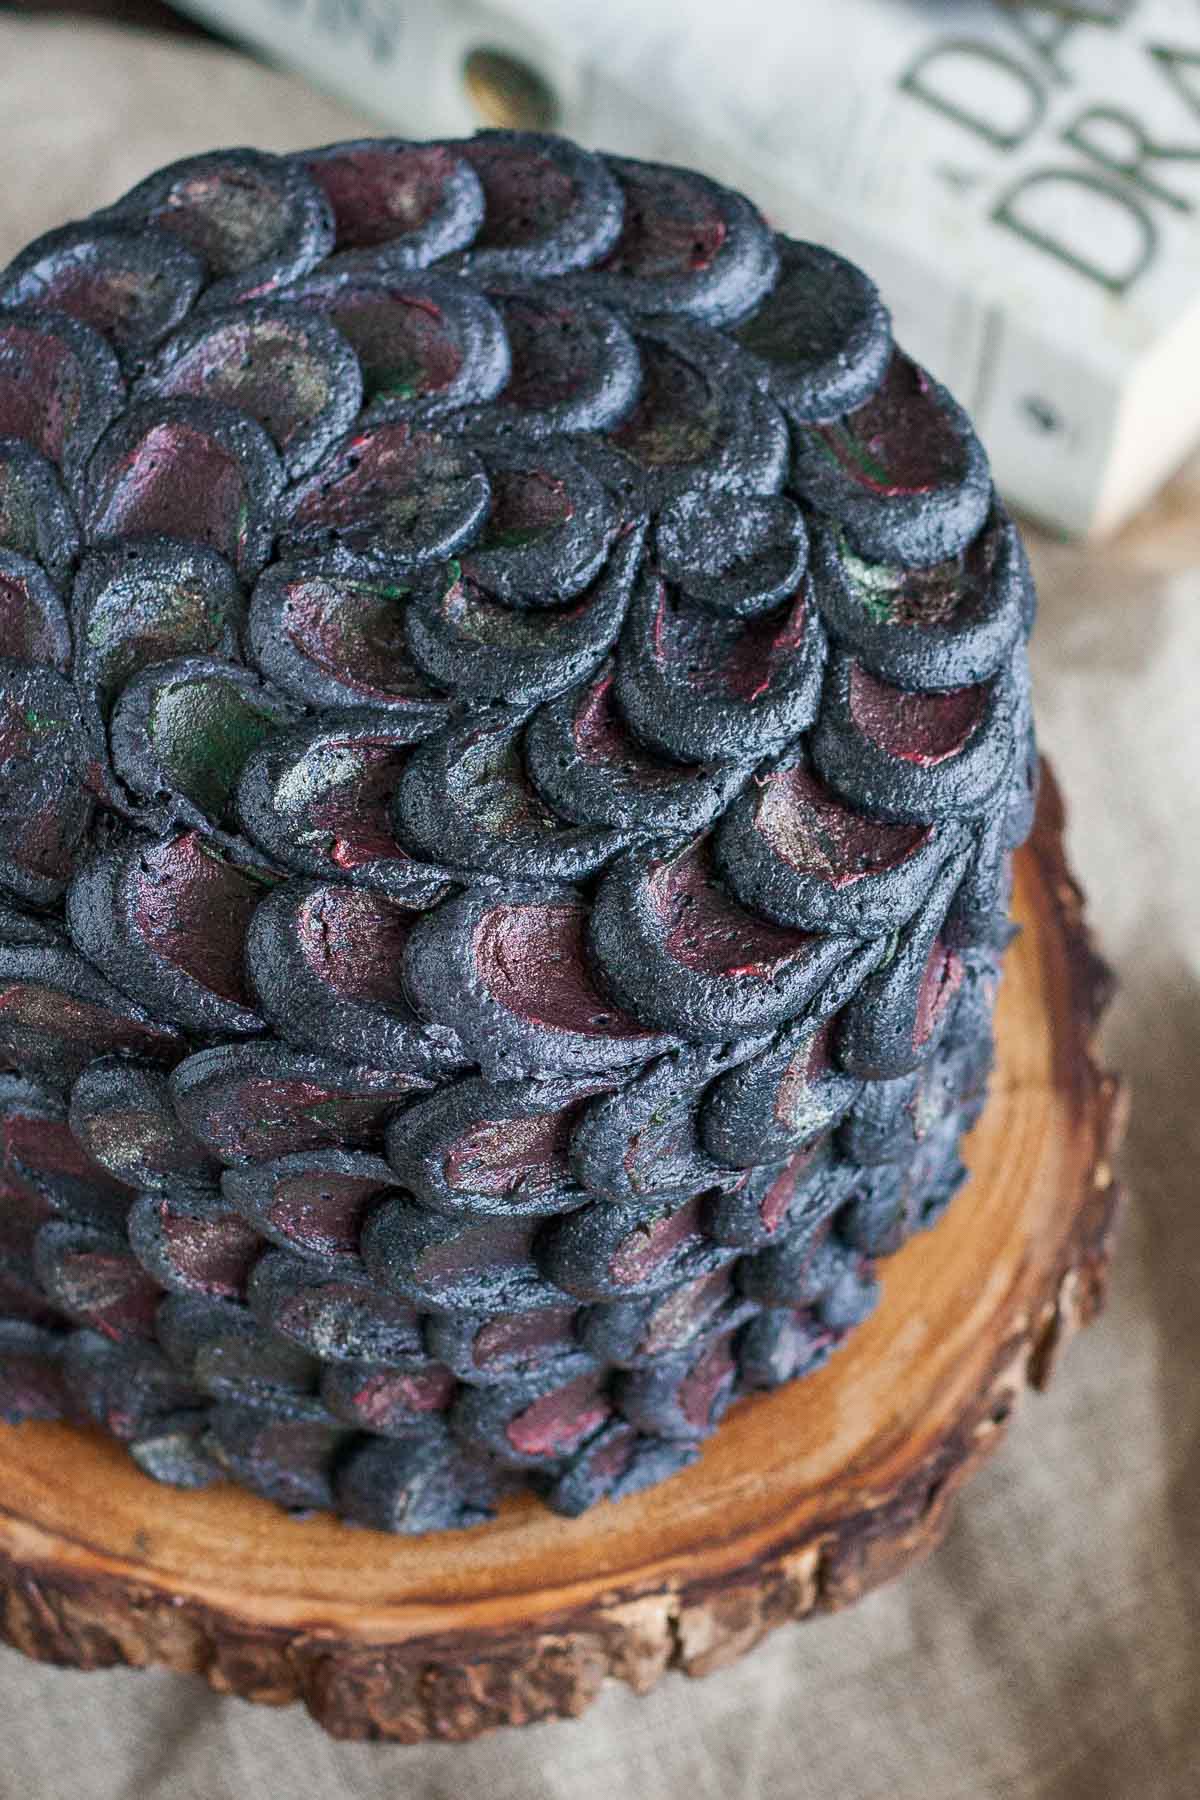 Close up of the dragonscales on the top of the cake.